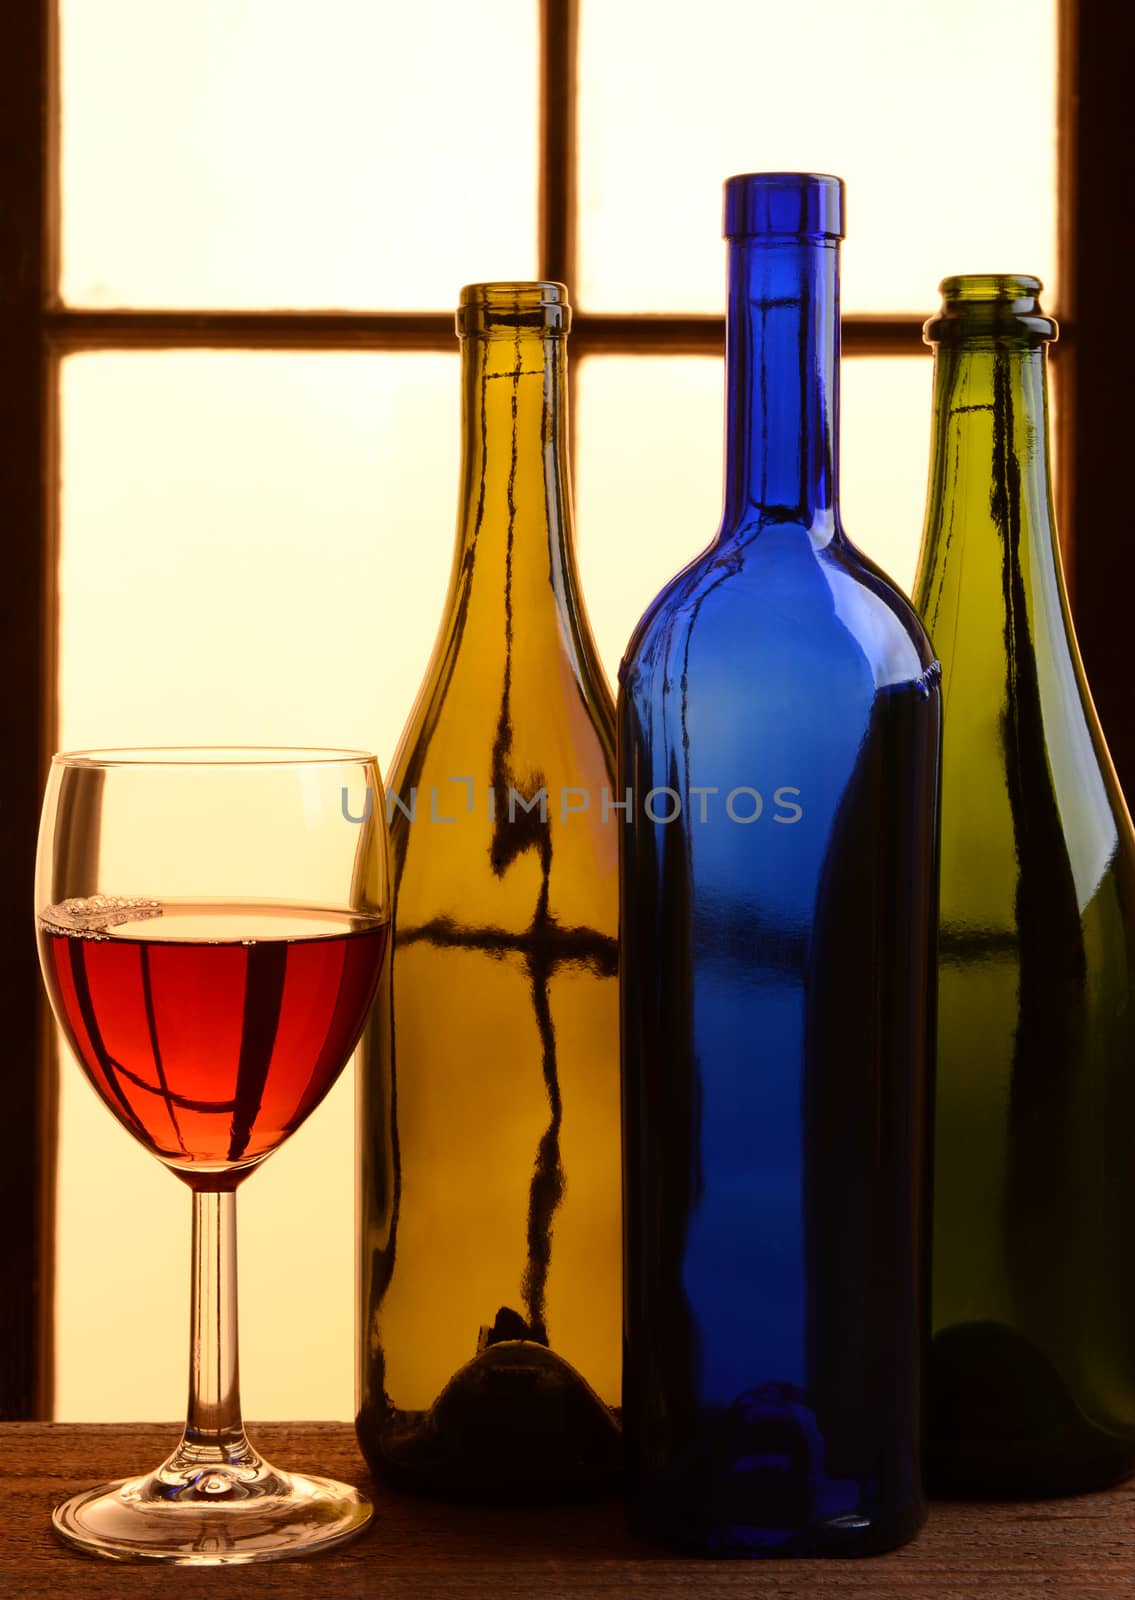 A wine still life with warm tones. Three different wine bottles and a glass of red wine in front of a window with warm sunlight.